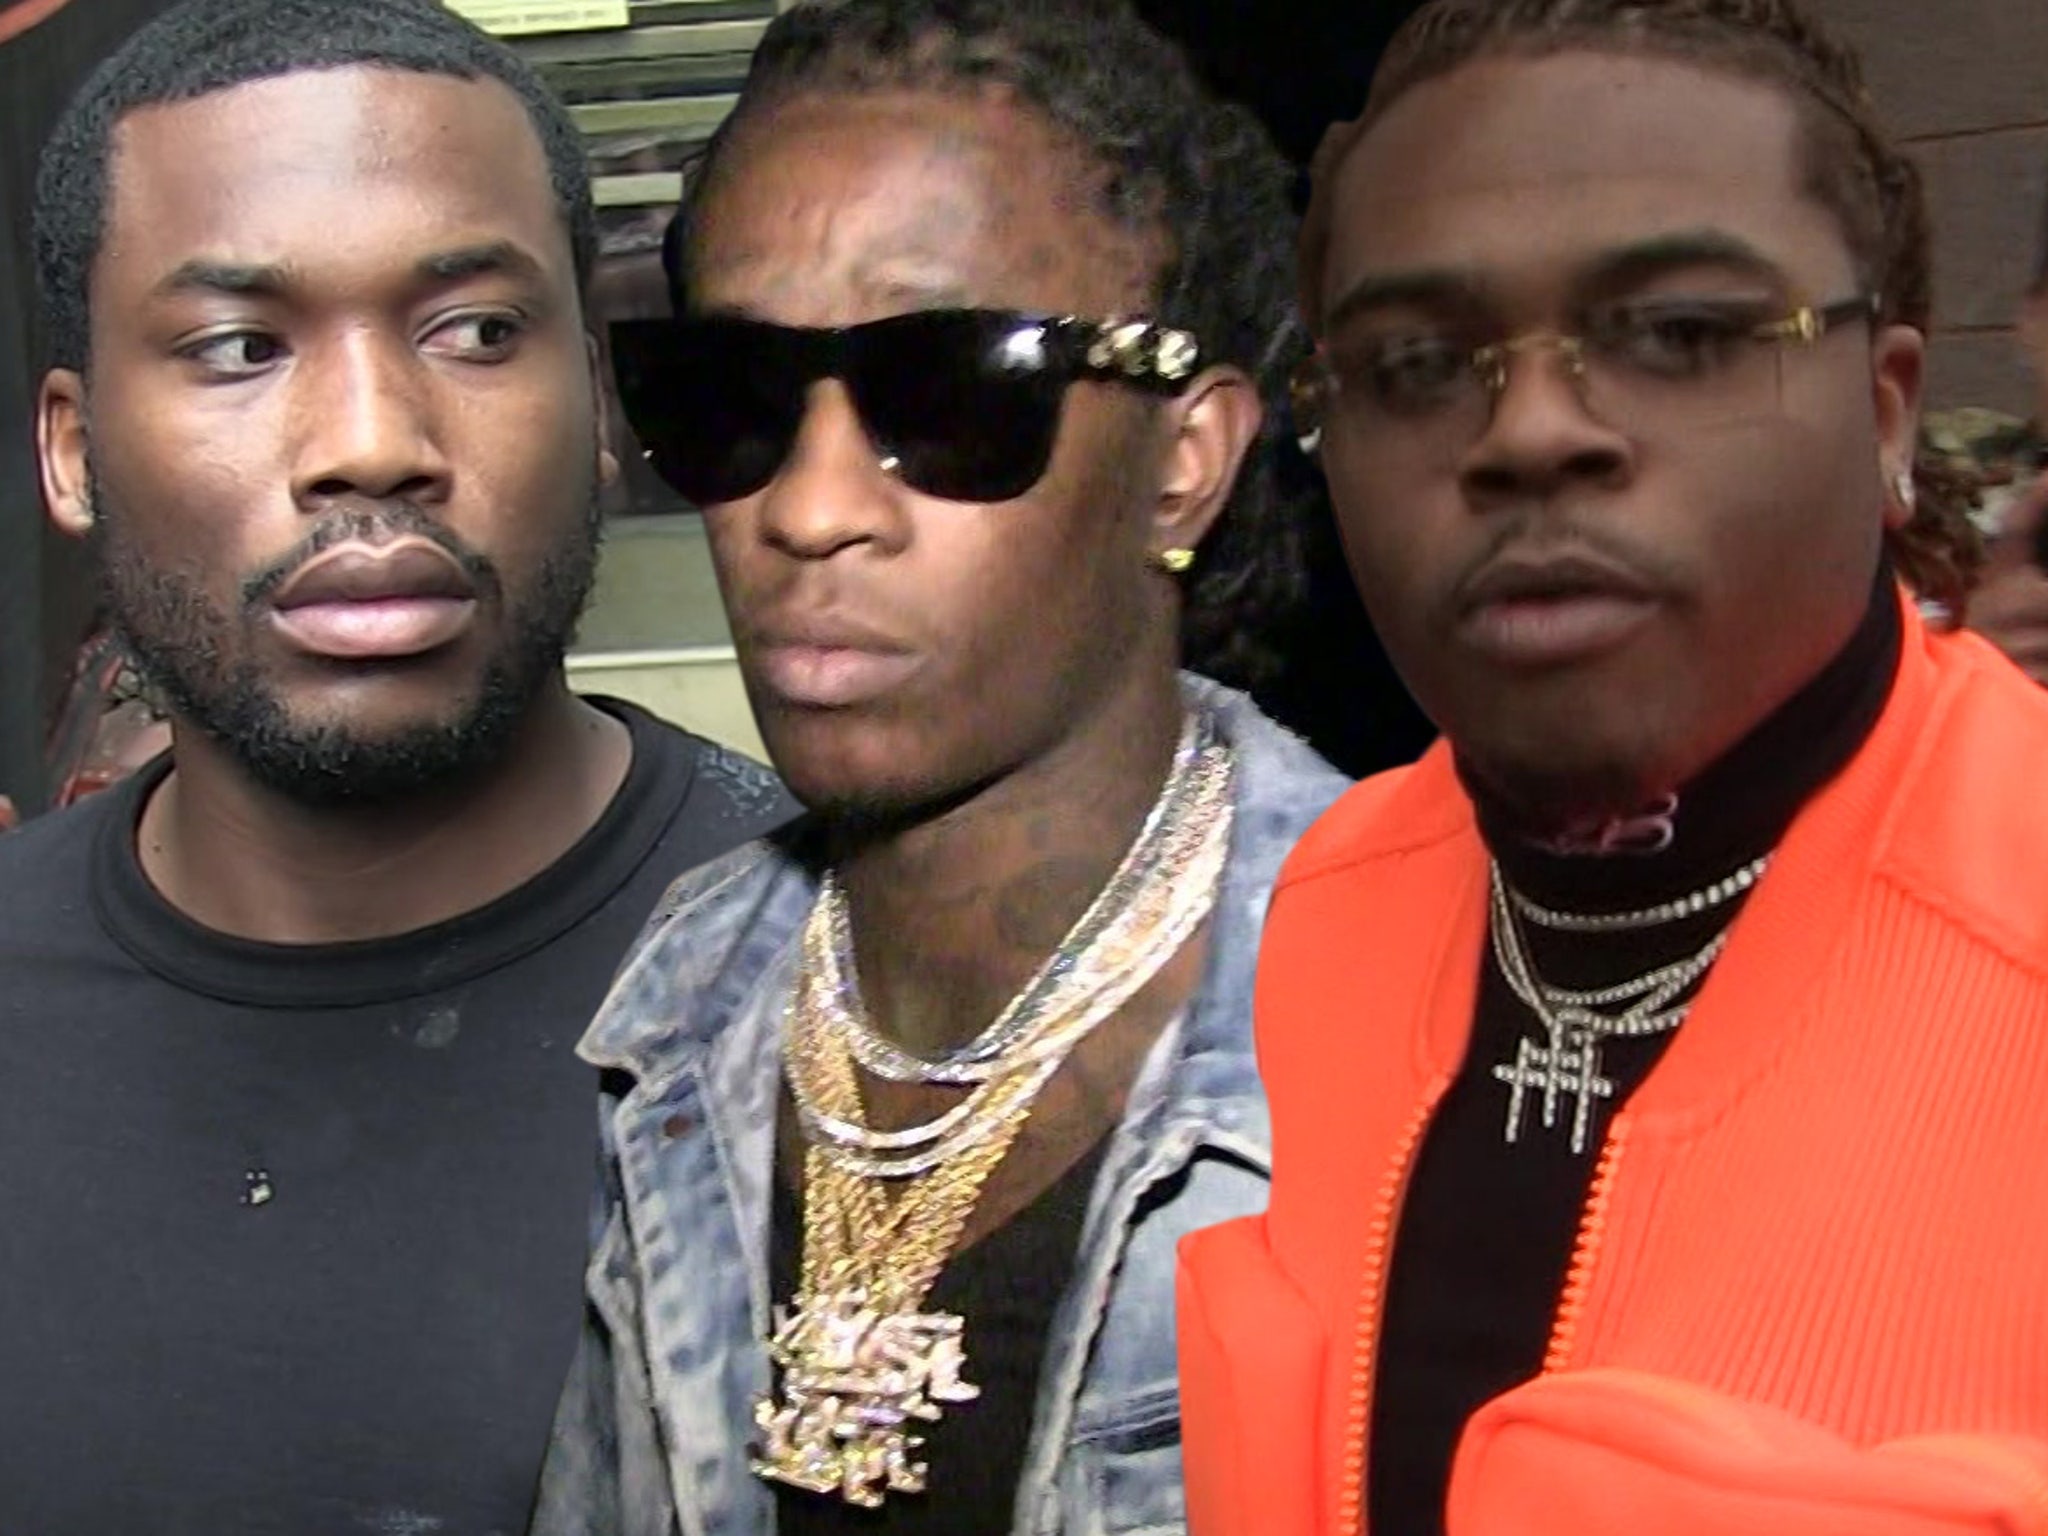 Several native Please Young Thug, Gunna Get Support from Metro Boomin, Post Malone and Meek Mill